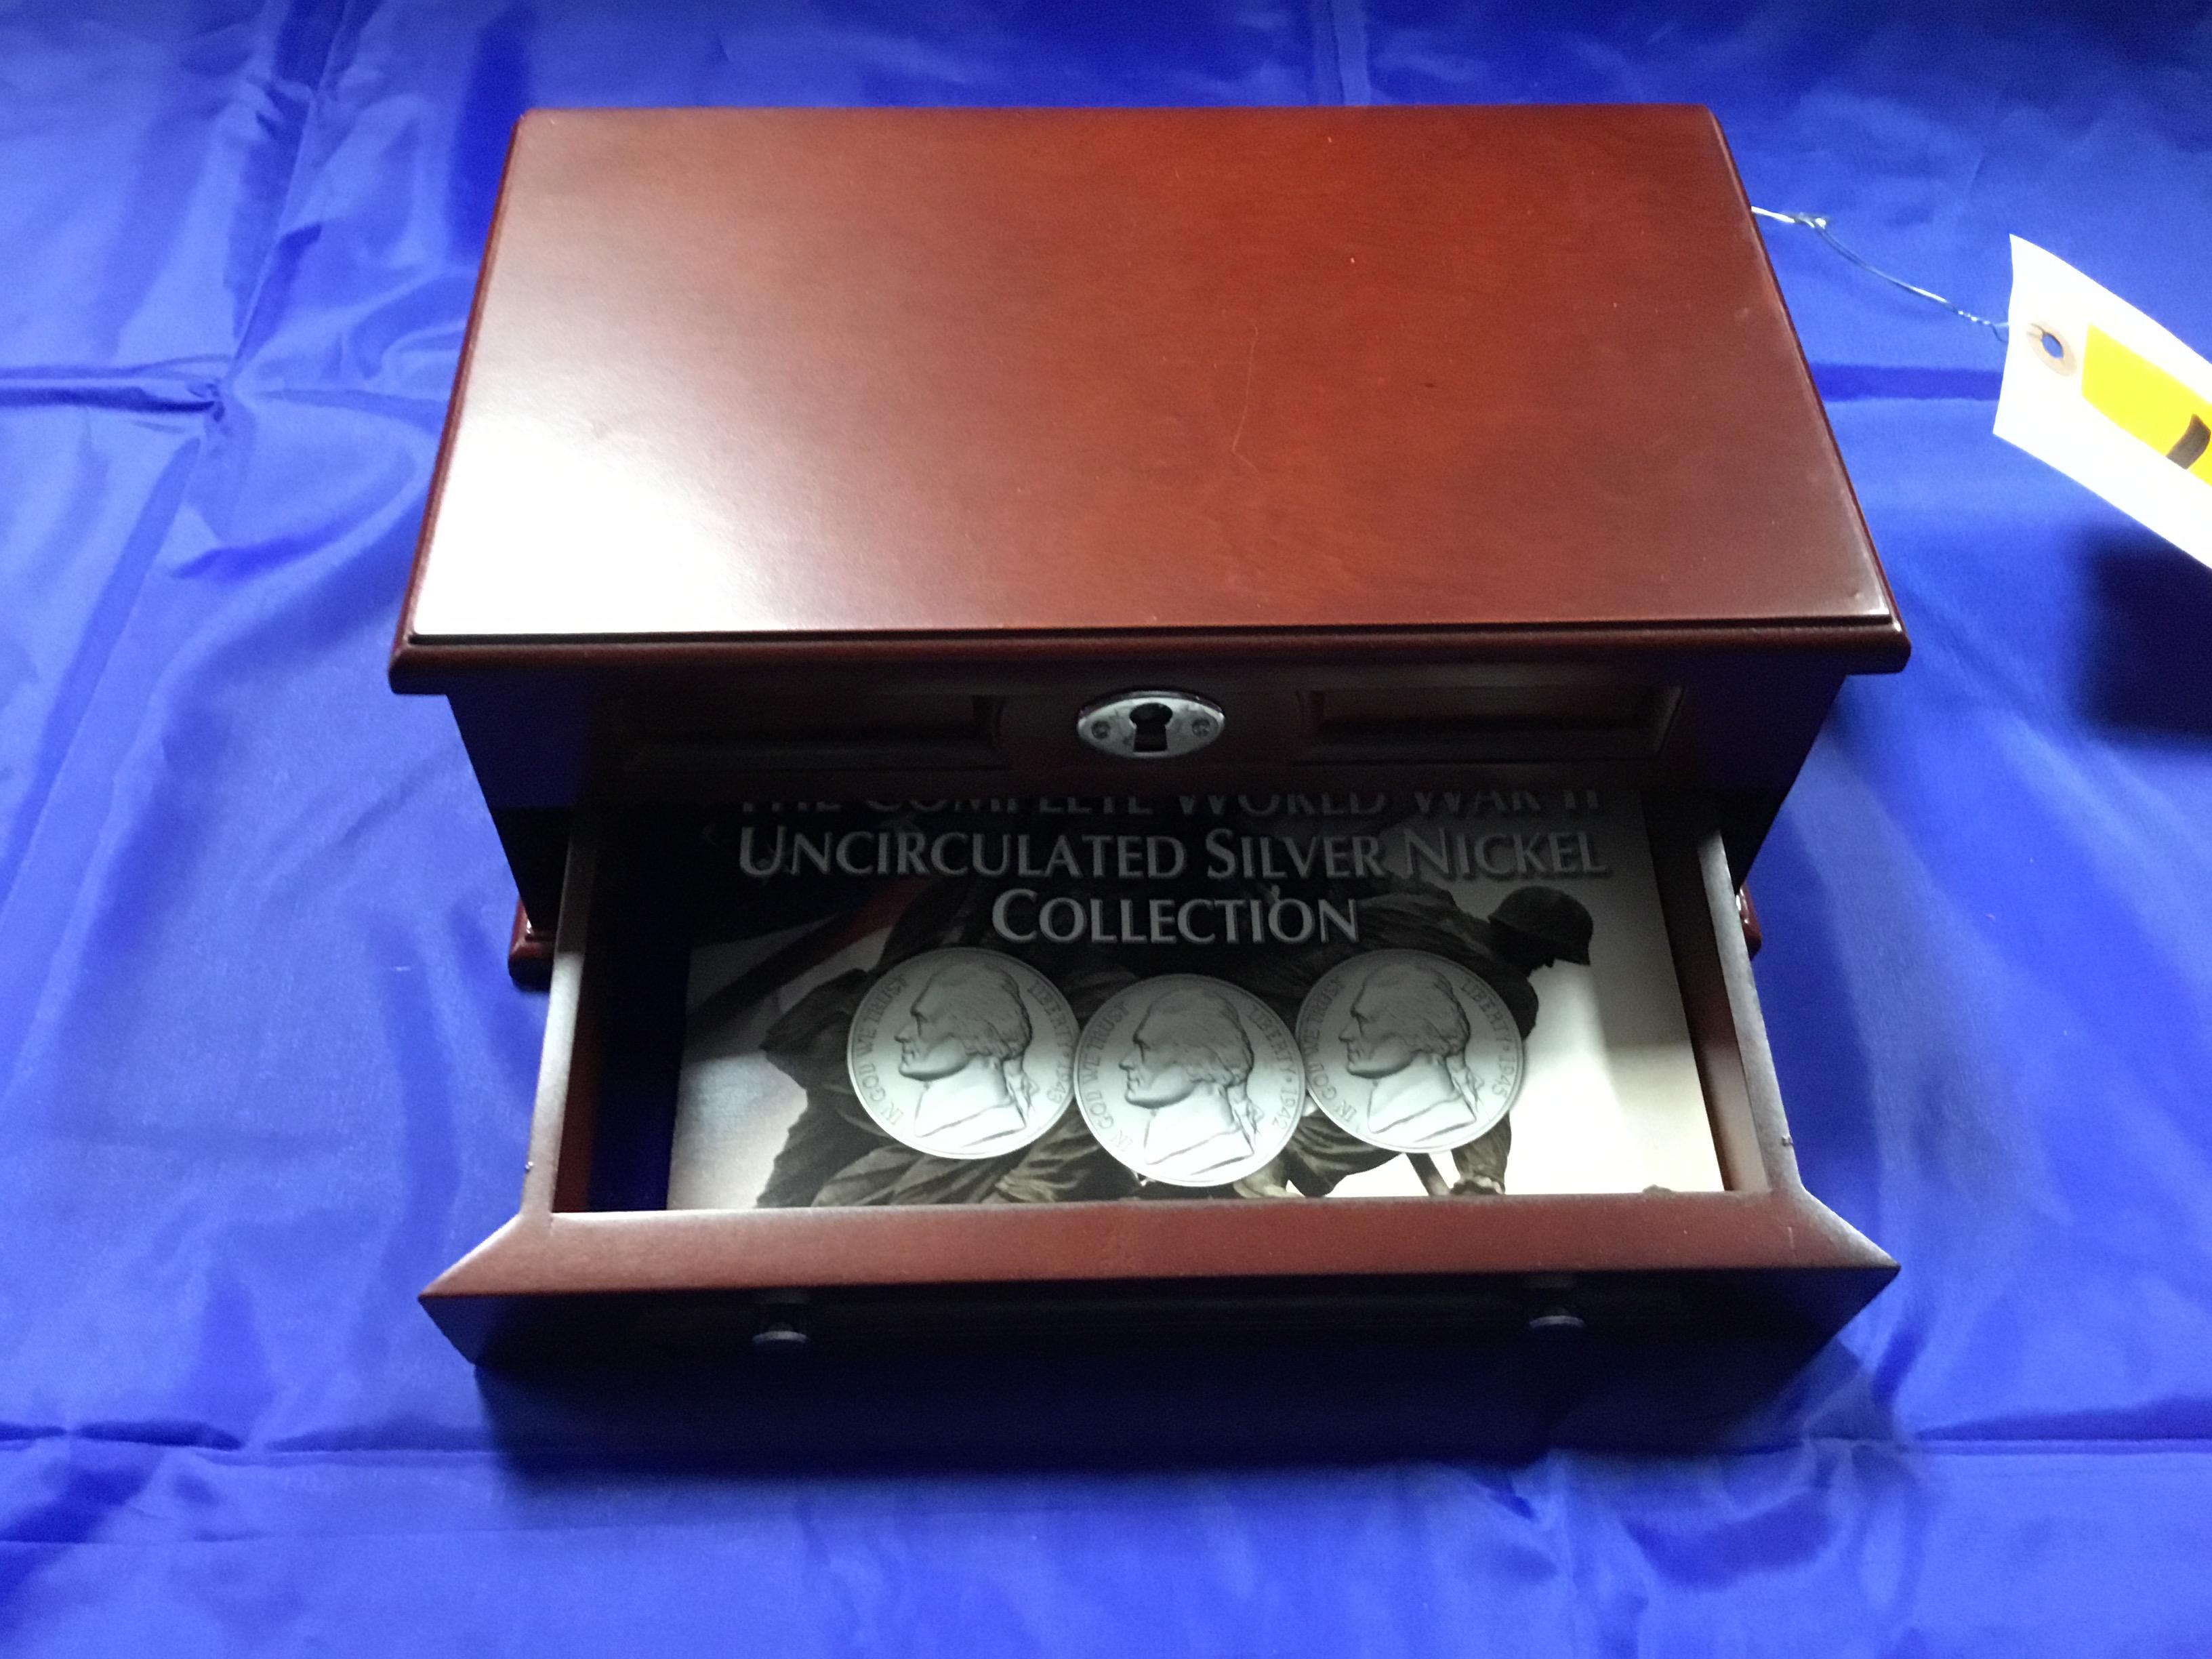 The Complete World War II Uncirculated Silver Nickel Collection in Wood Display Case with Pull Out D